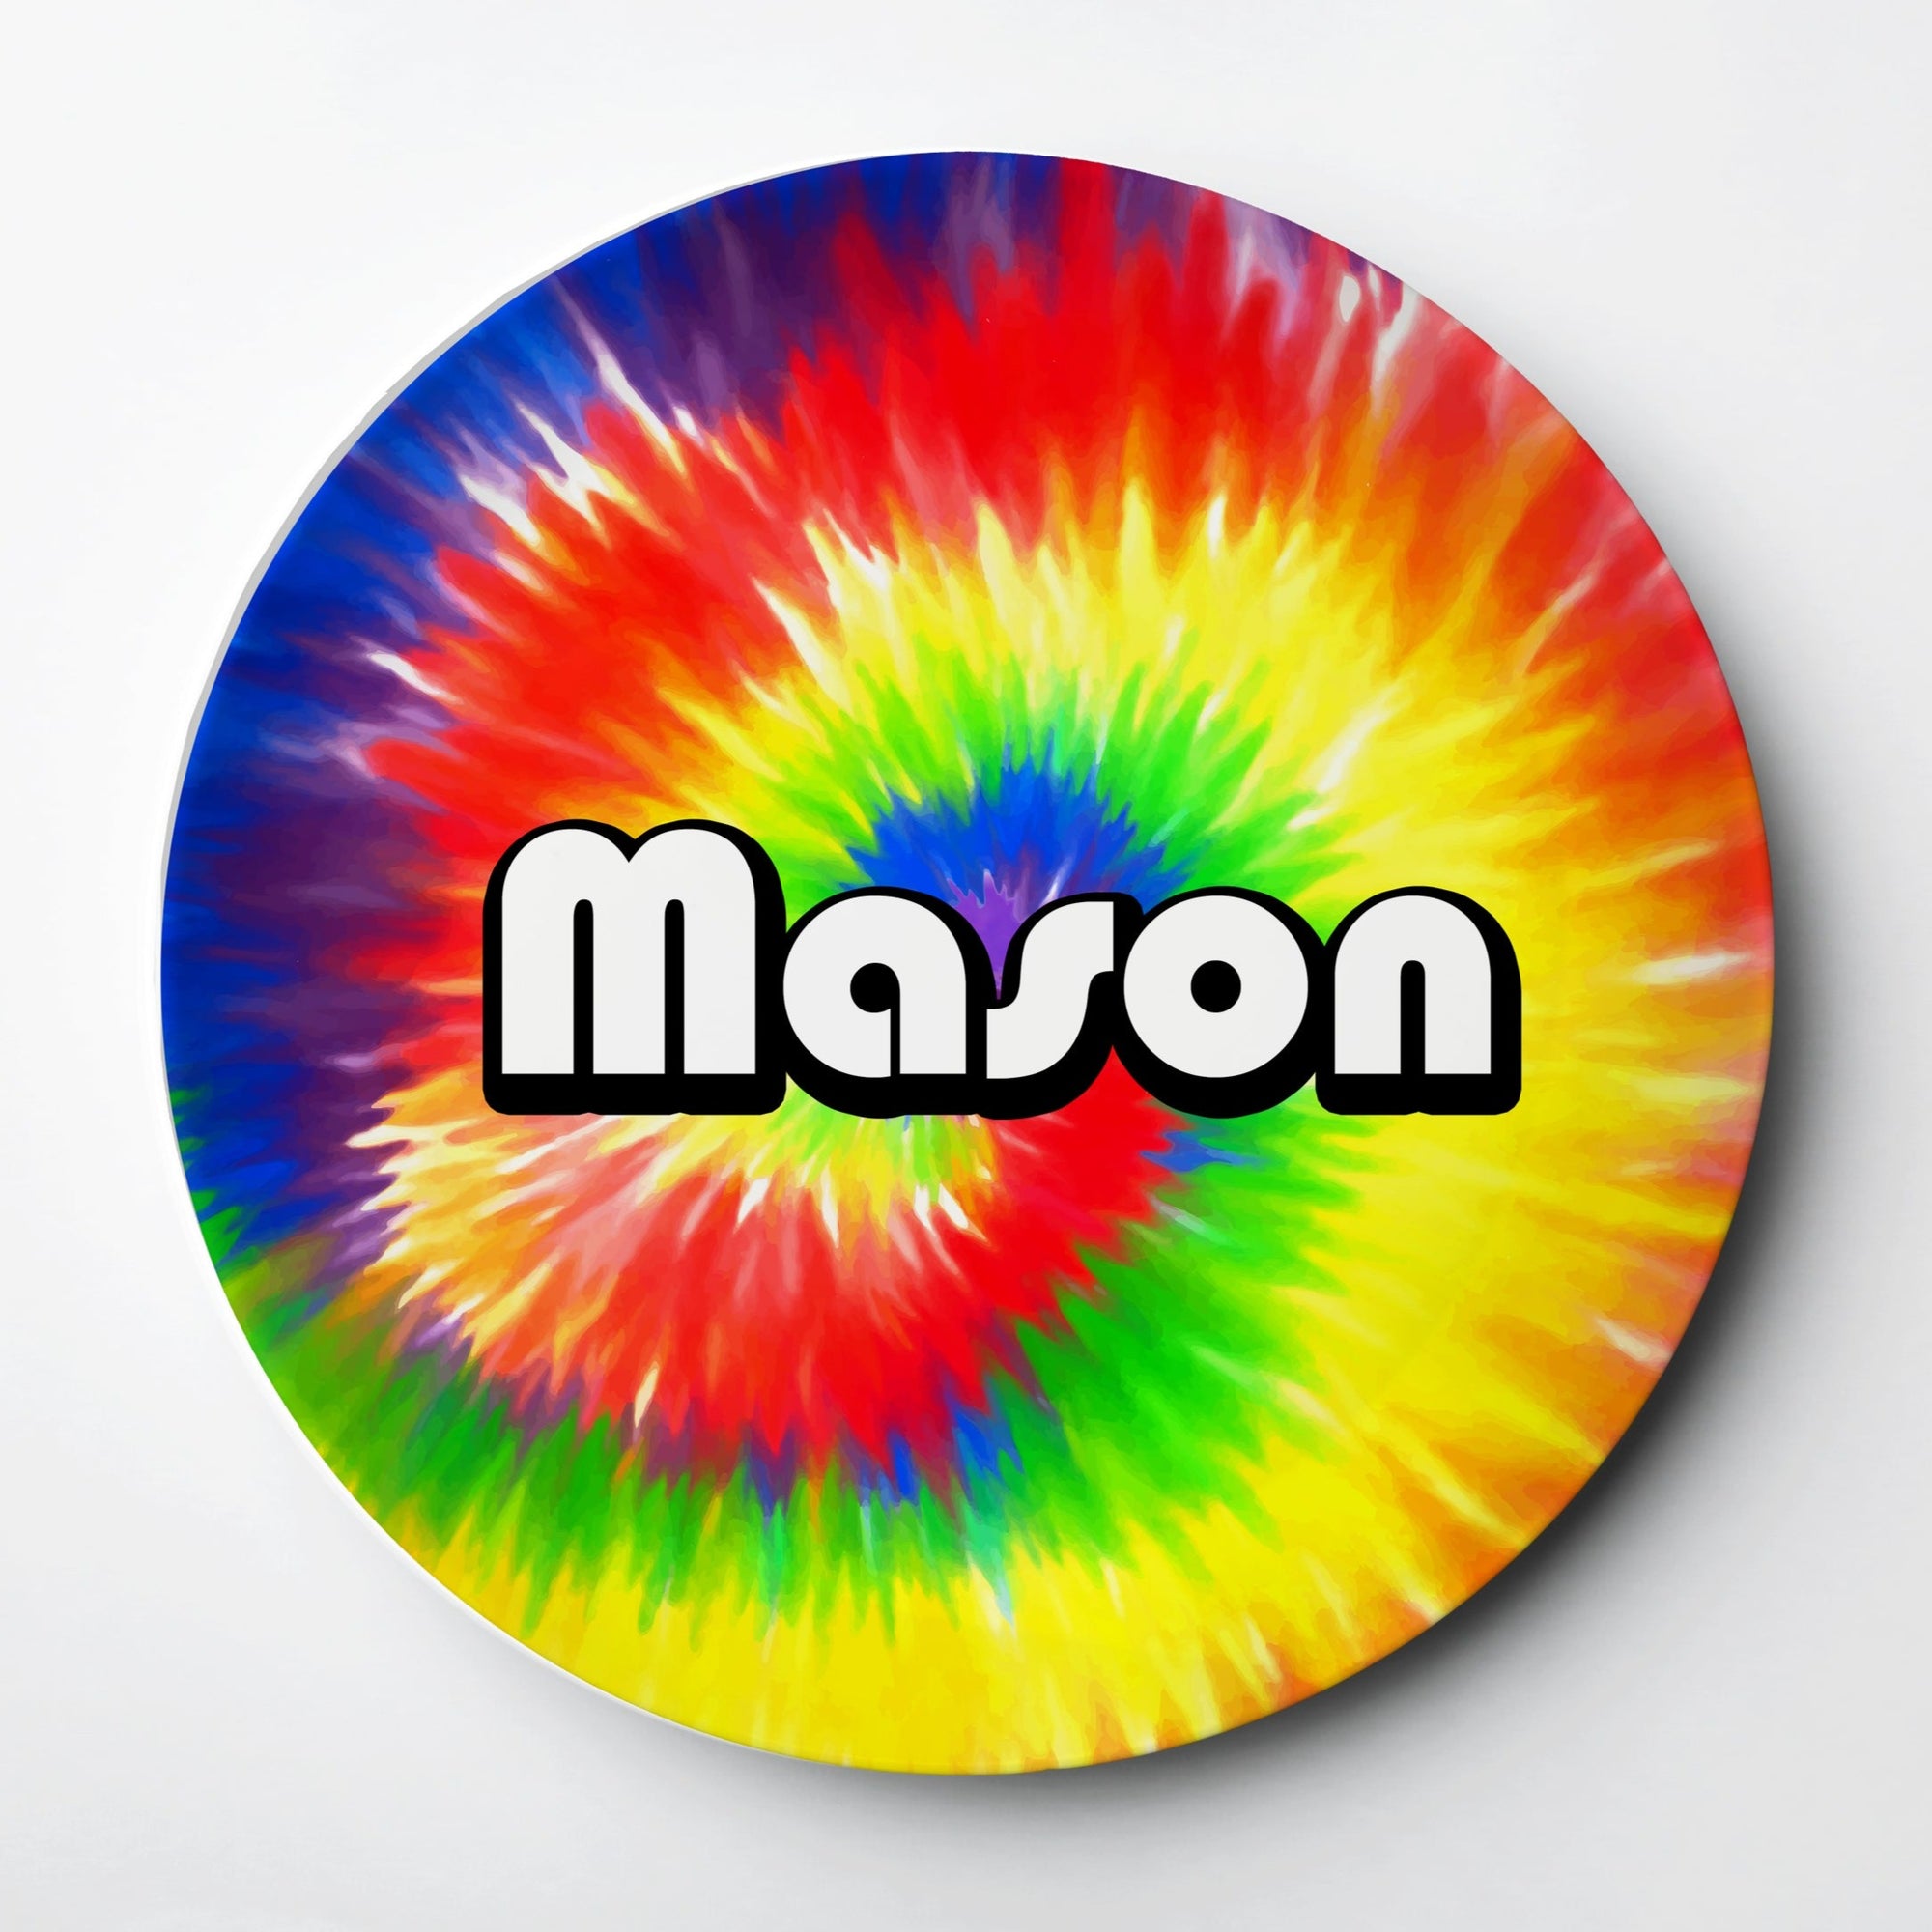 Personalized Kid's Plate with fun tie dye design, Red - Pipsy.com